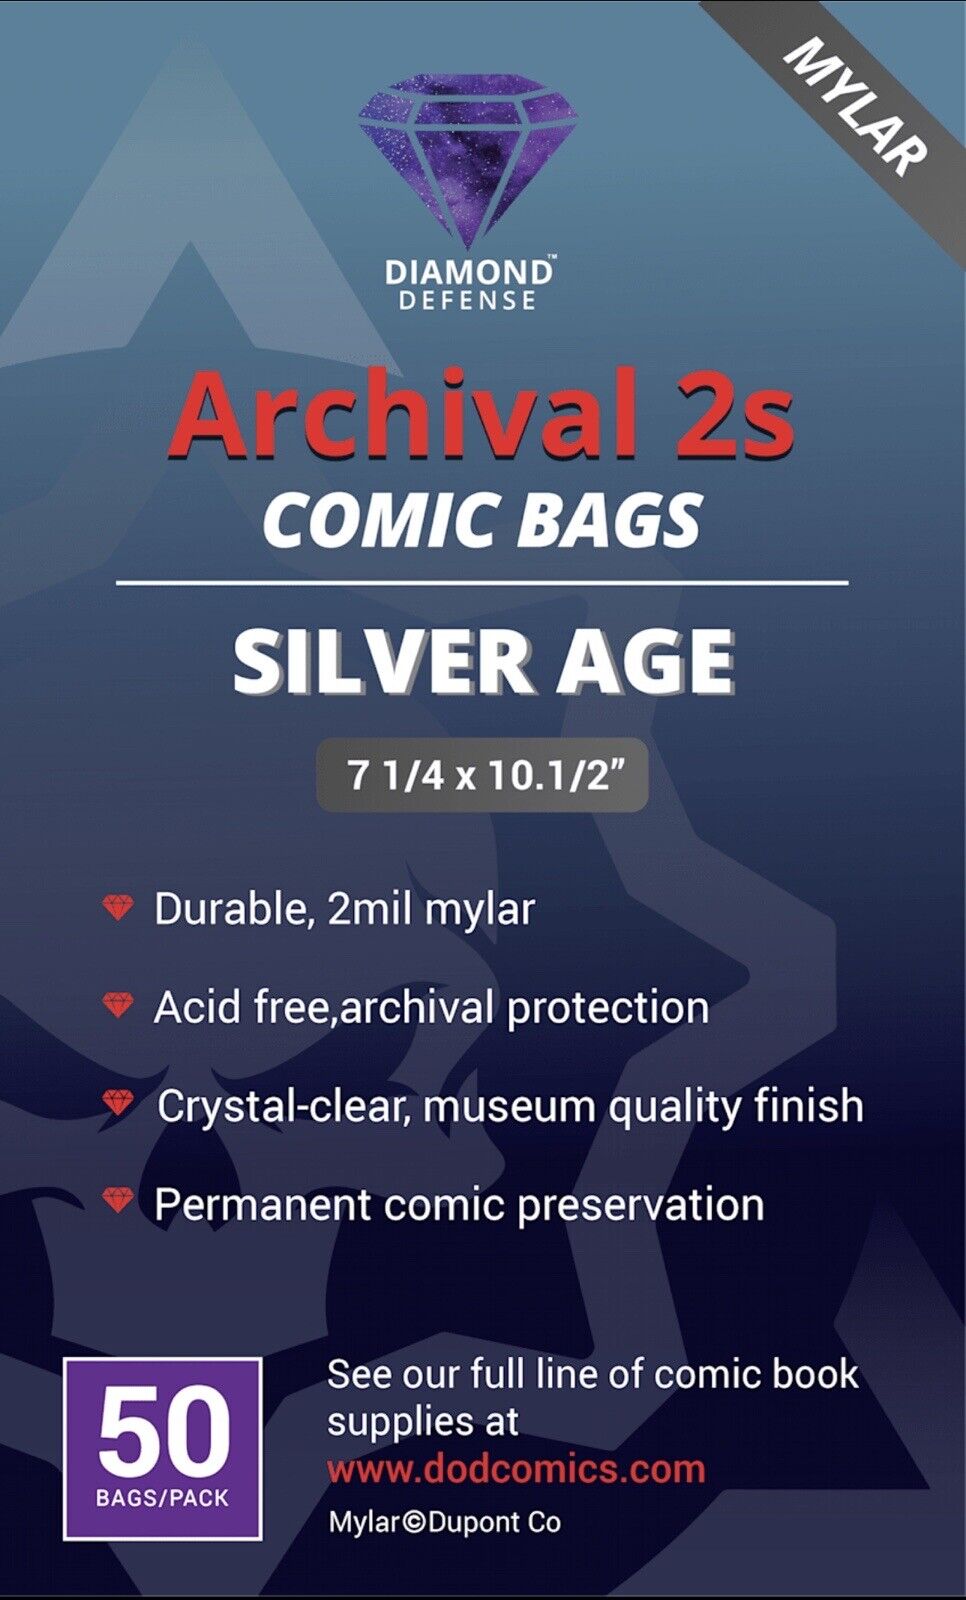 Mylar ARCHIVAL2s Comic Bags - Silver Age 50 count pack